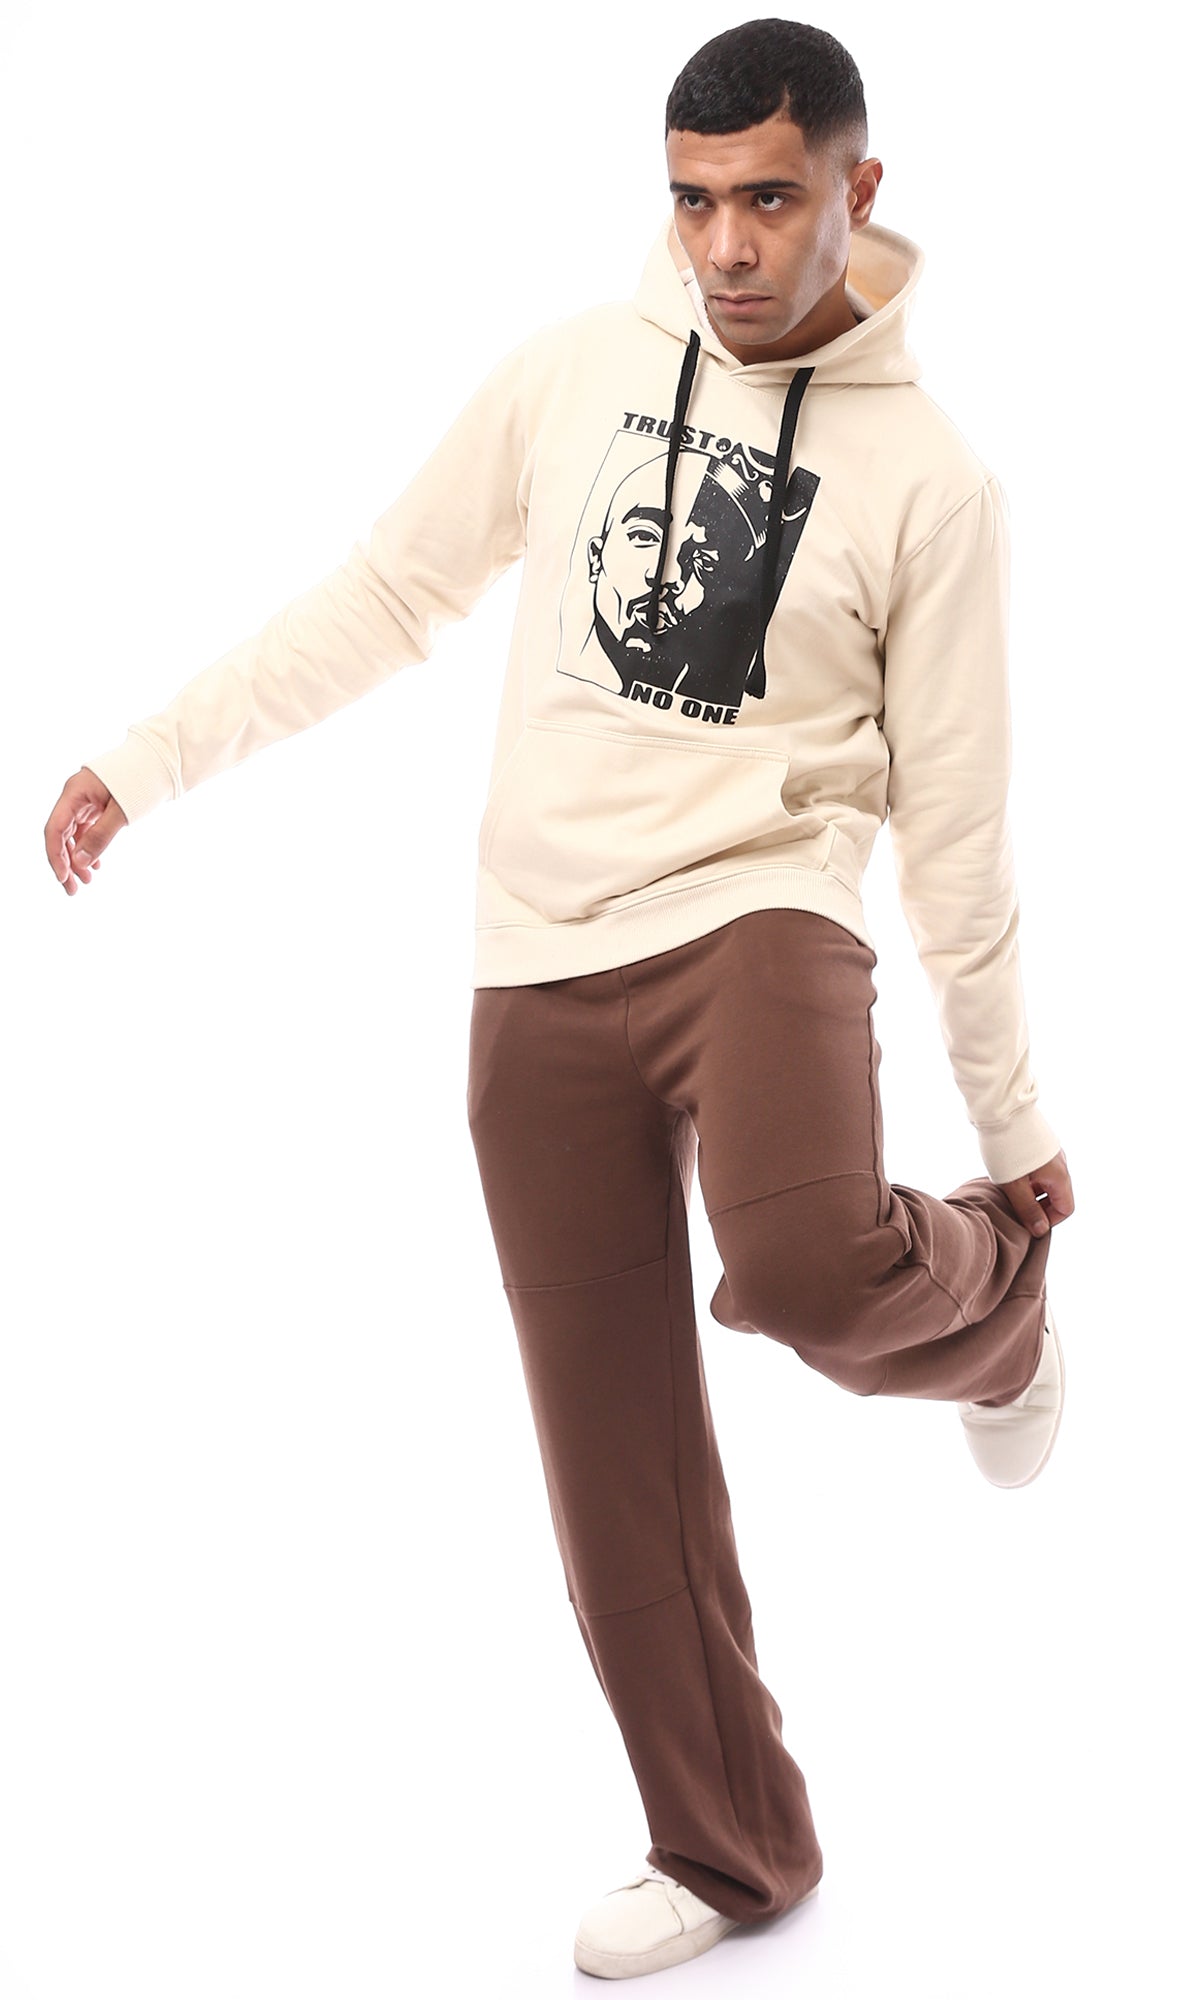 O174894 Solid Slip On Cotton Brown Pants